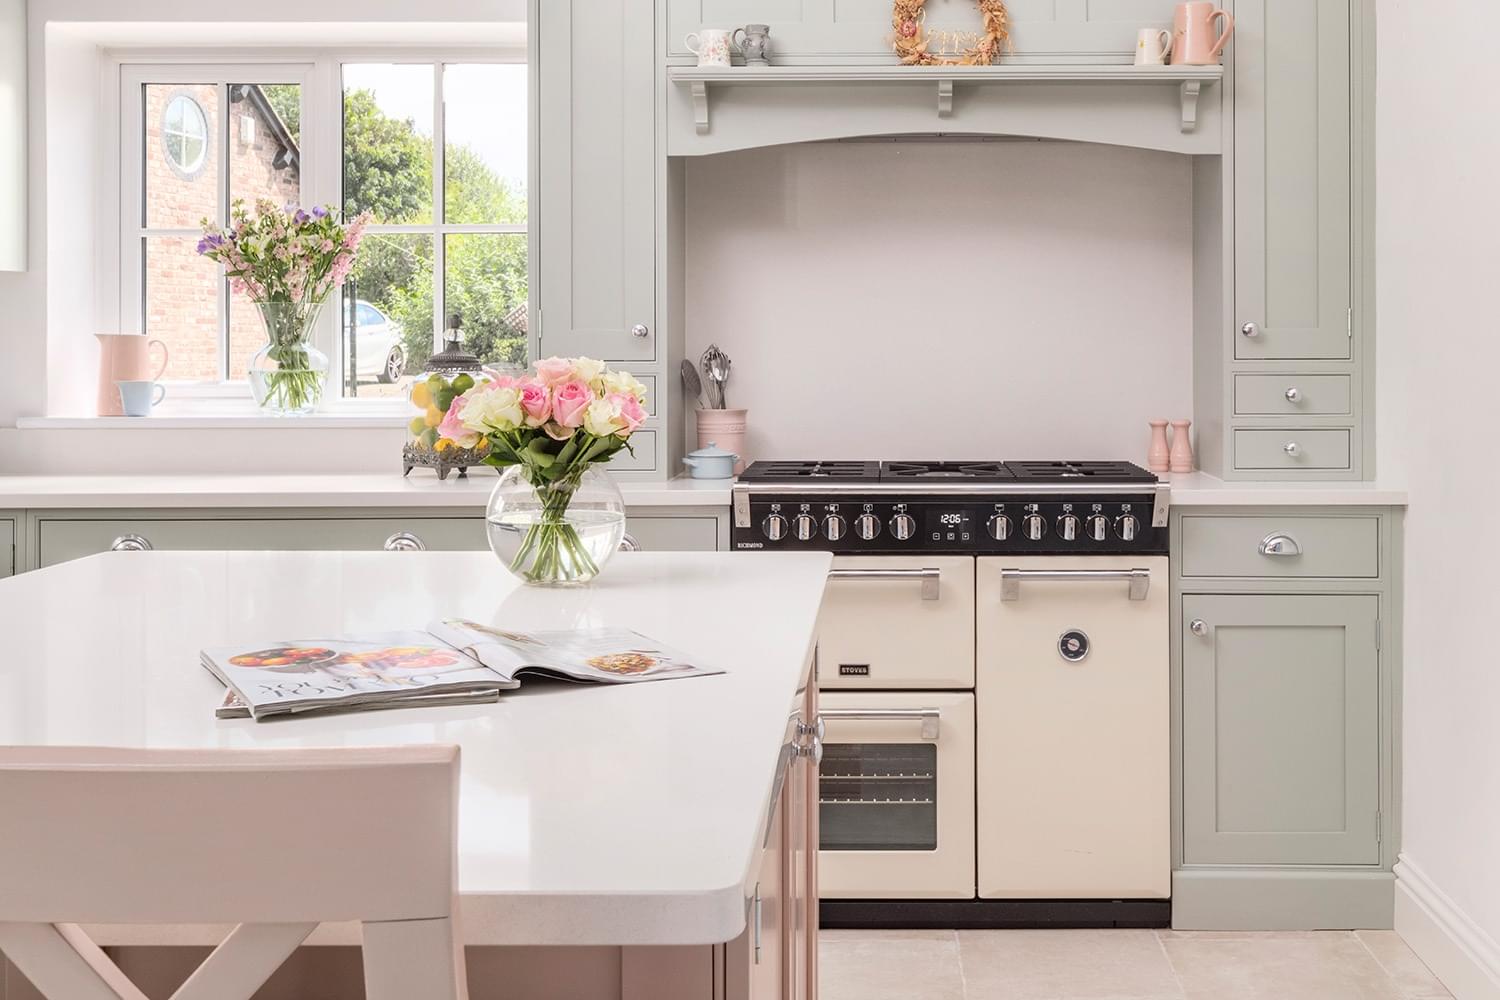 How much should you spend on worktops?